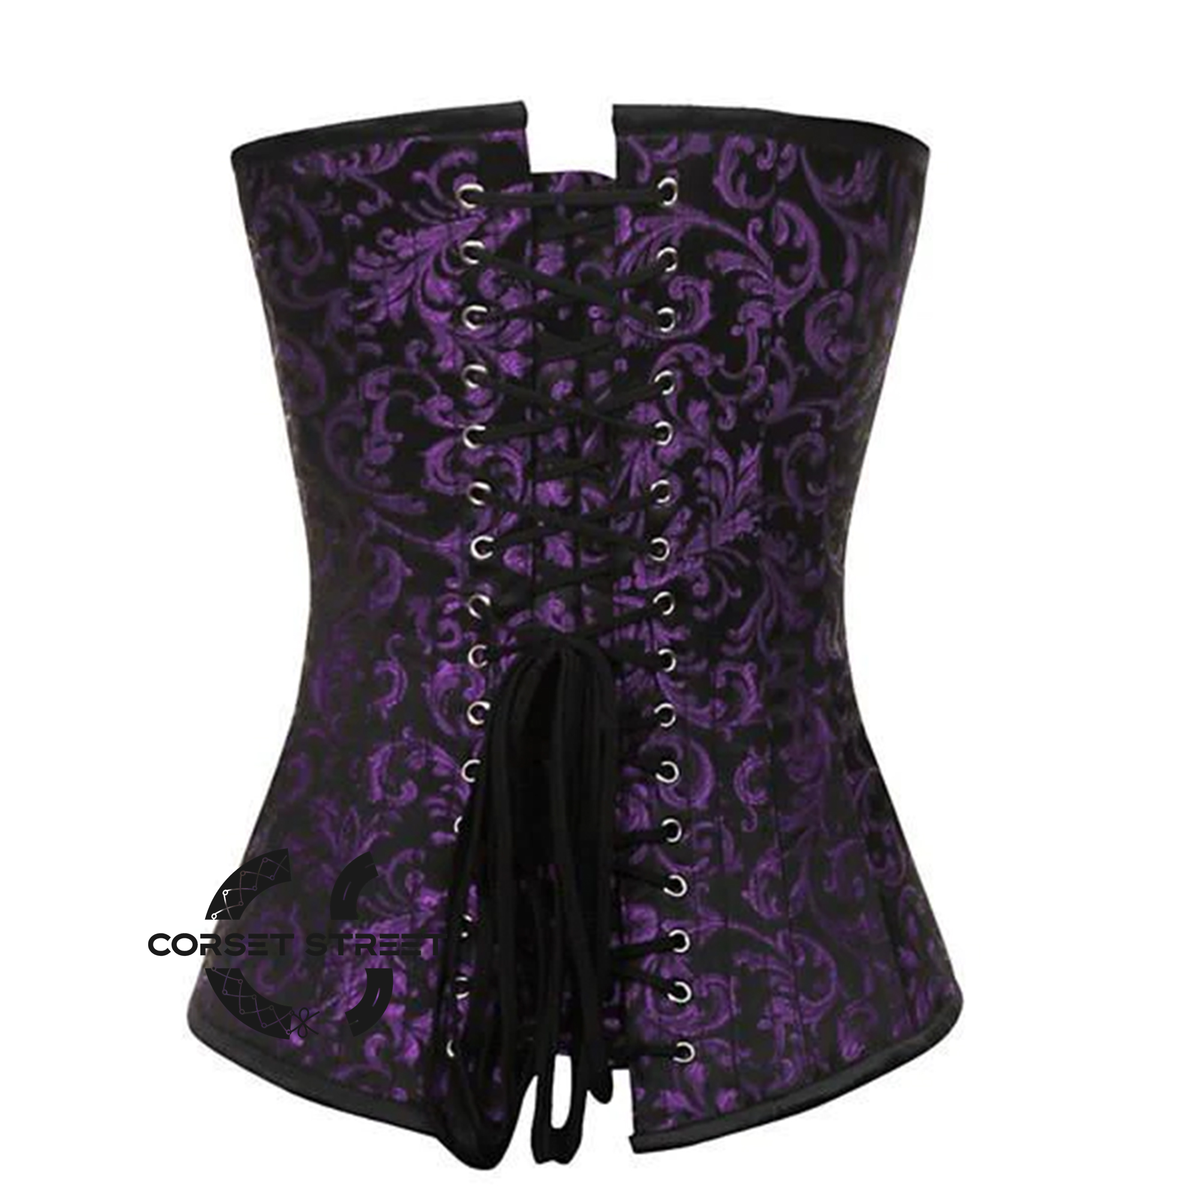 Purple And Black Brocade Costume Gothic Corset Overbust Top